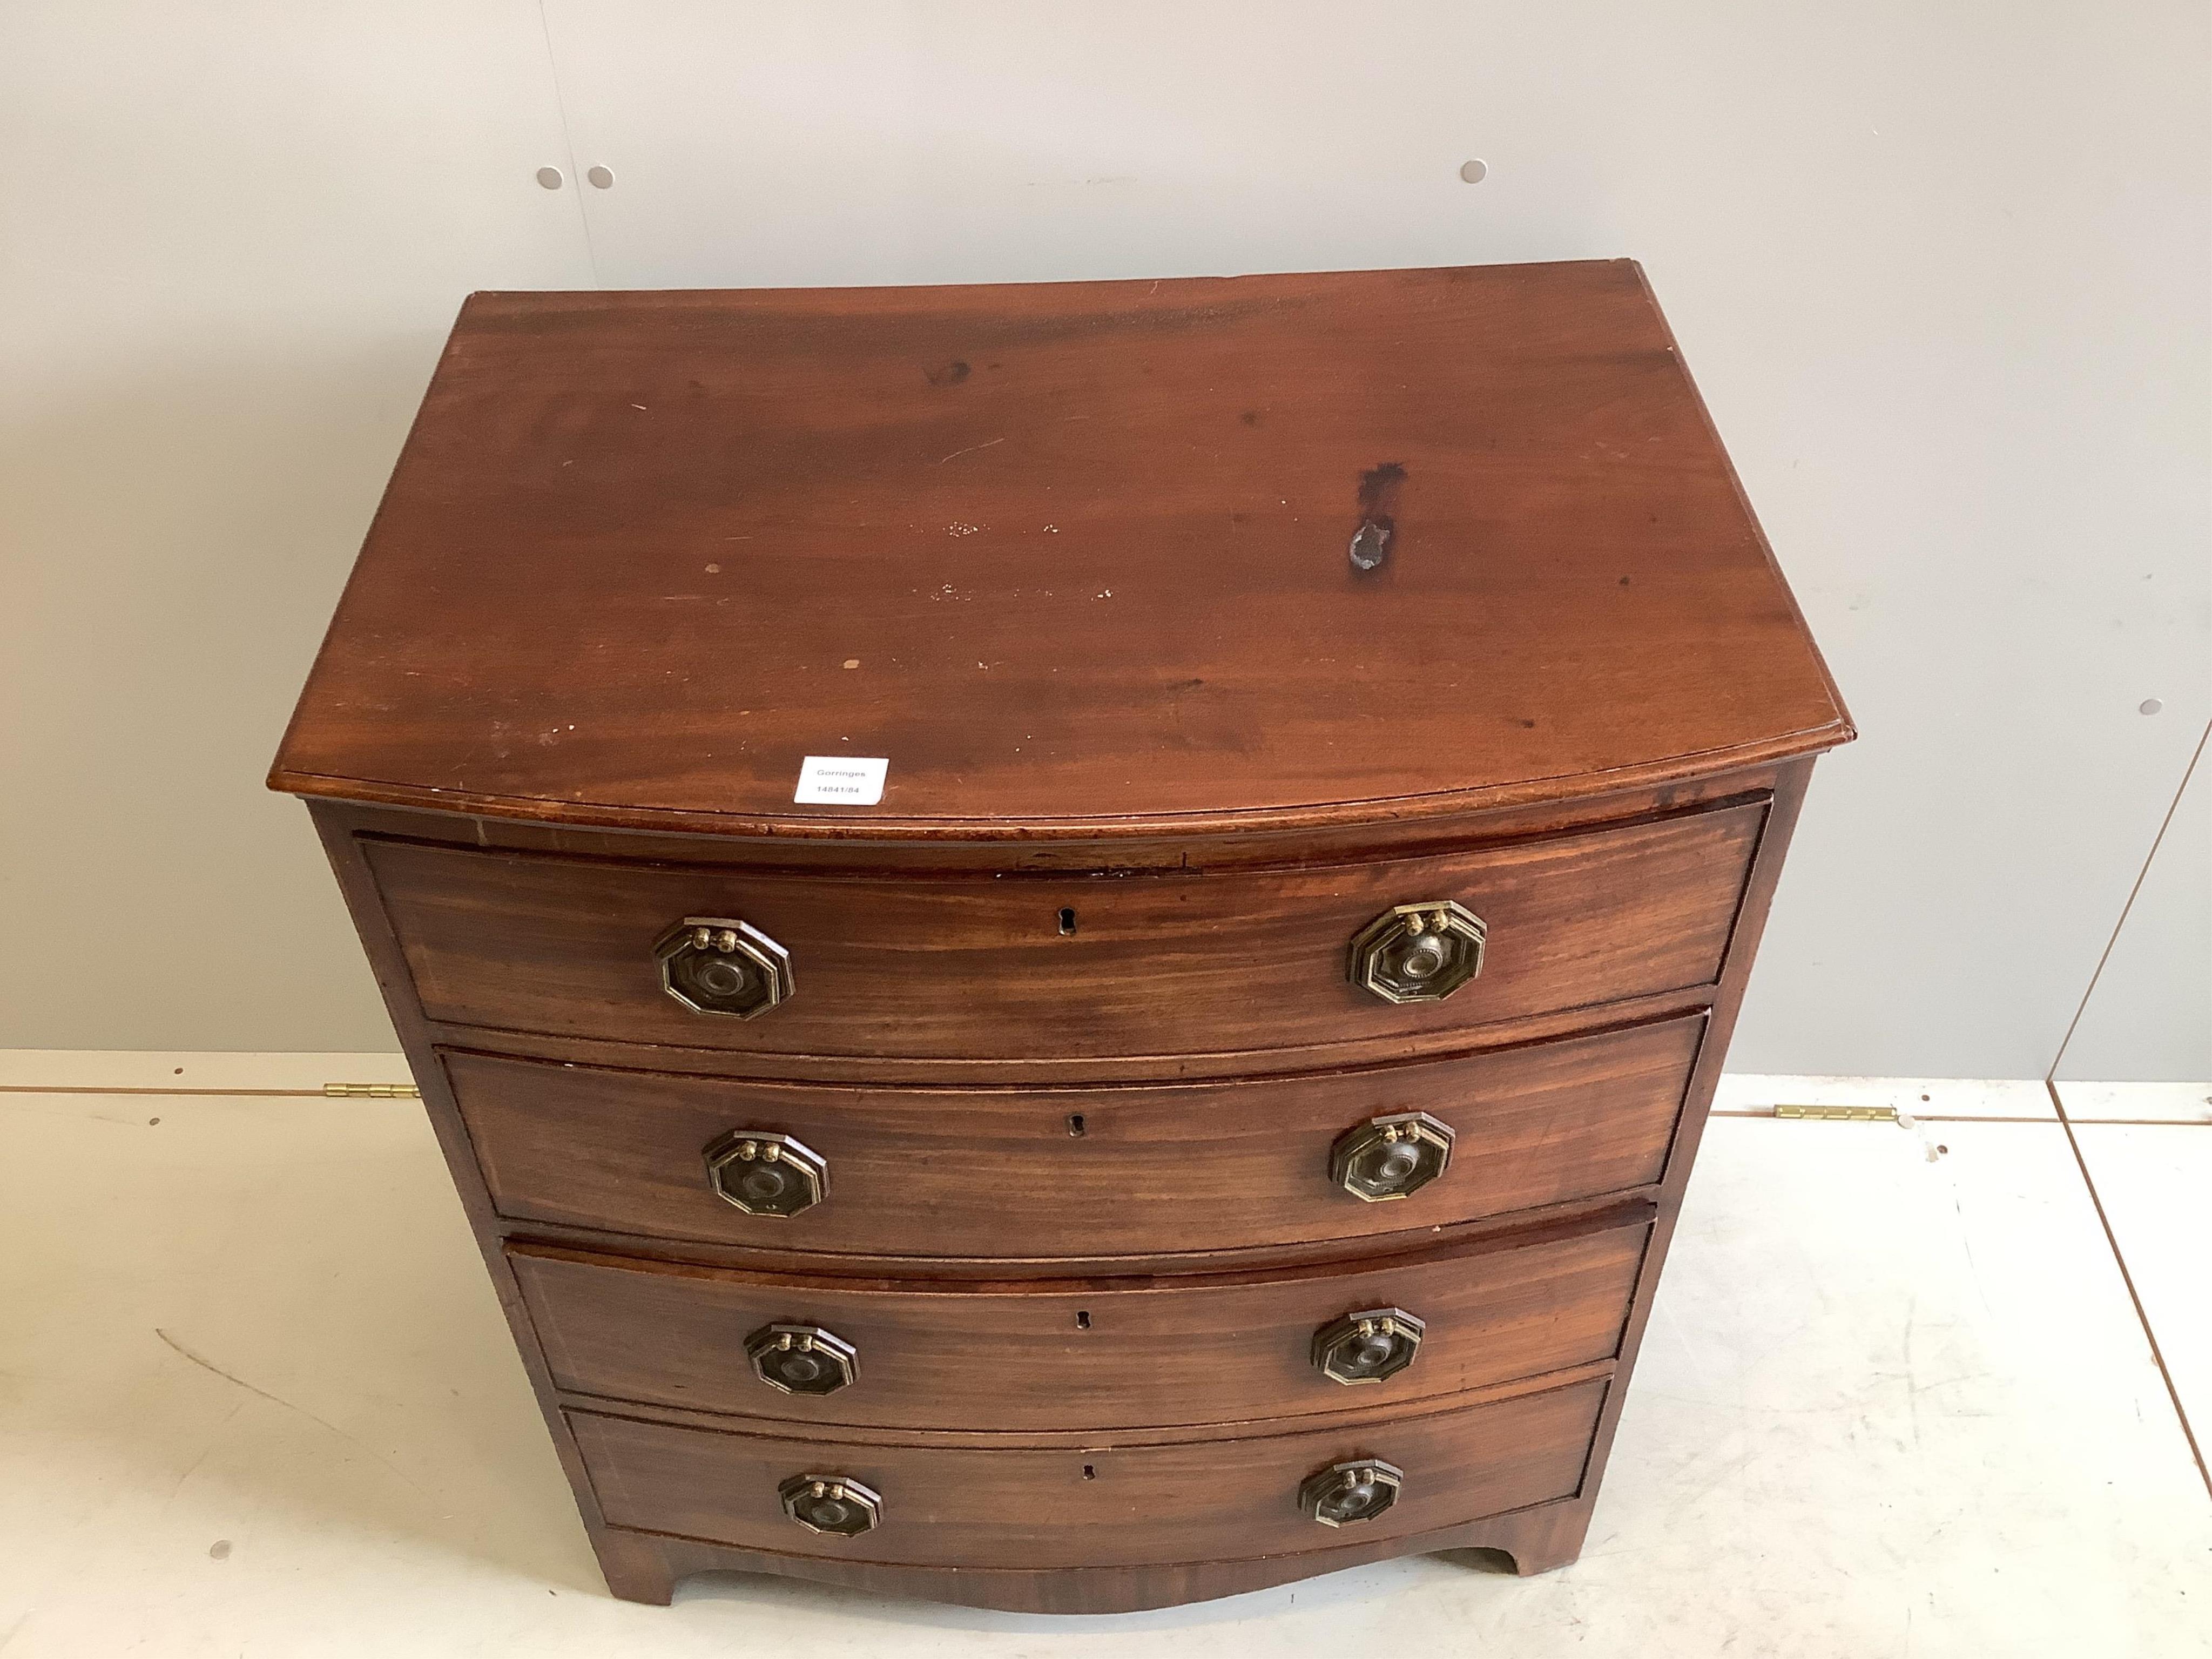 A small Regency mahogany bowfront chest, width 75cm, depth 52cm, height 84cm. Condition - fair